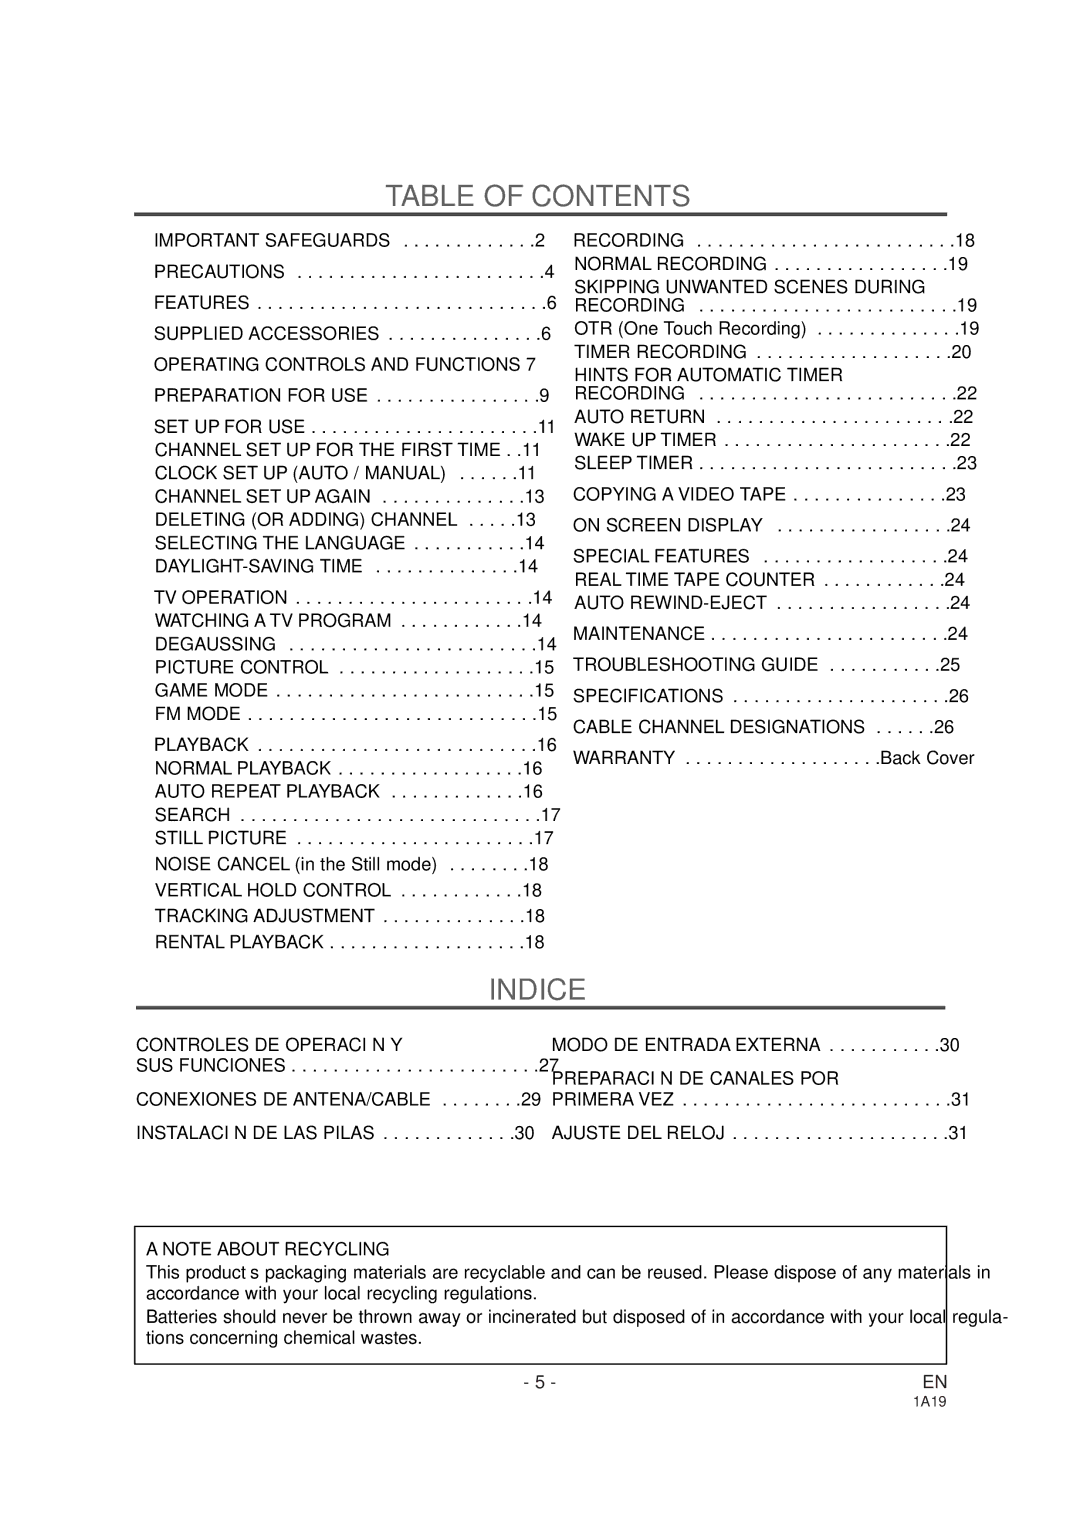 Sylvania SSC091 owner manual Table of Contents, Indice 